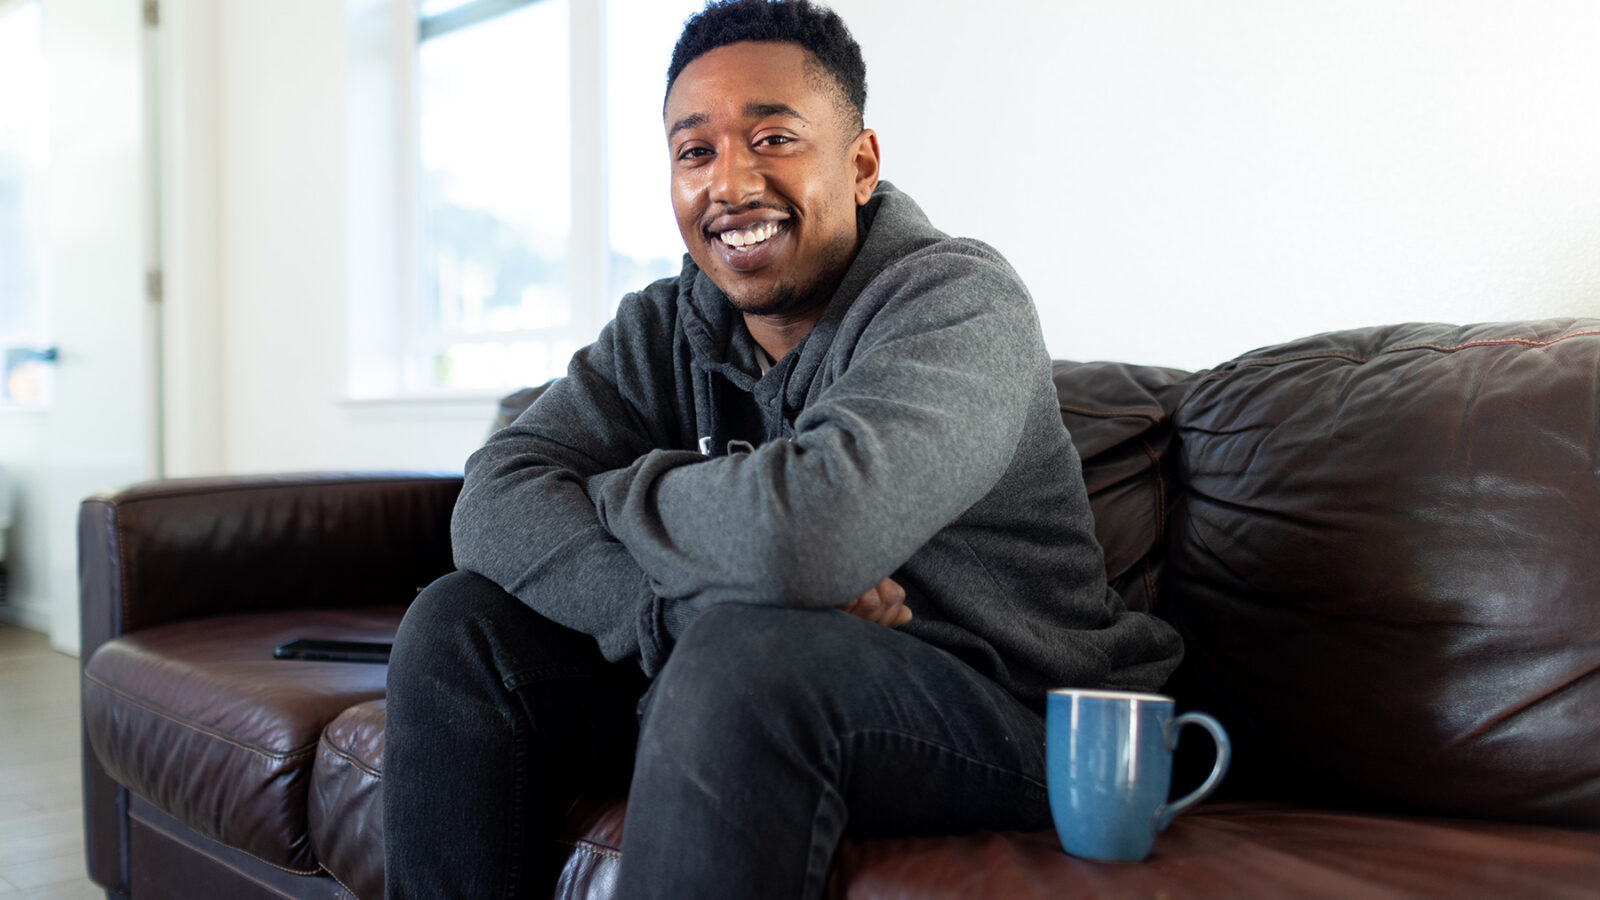 a man sits on a sofa smiling to the camera with a coffee mug next to him